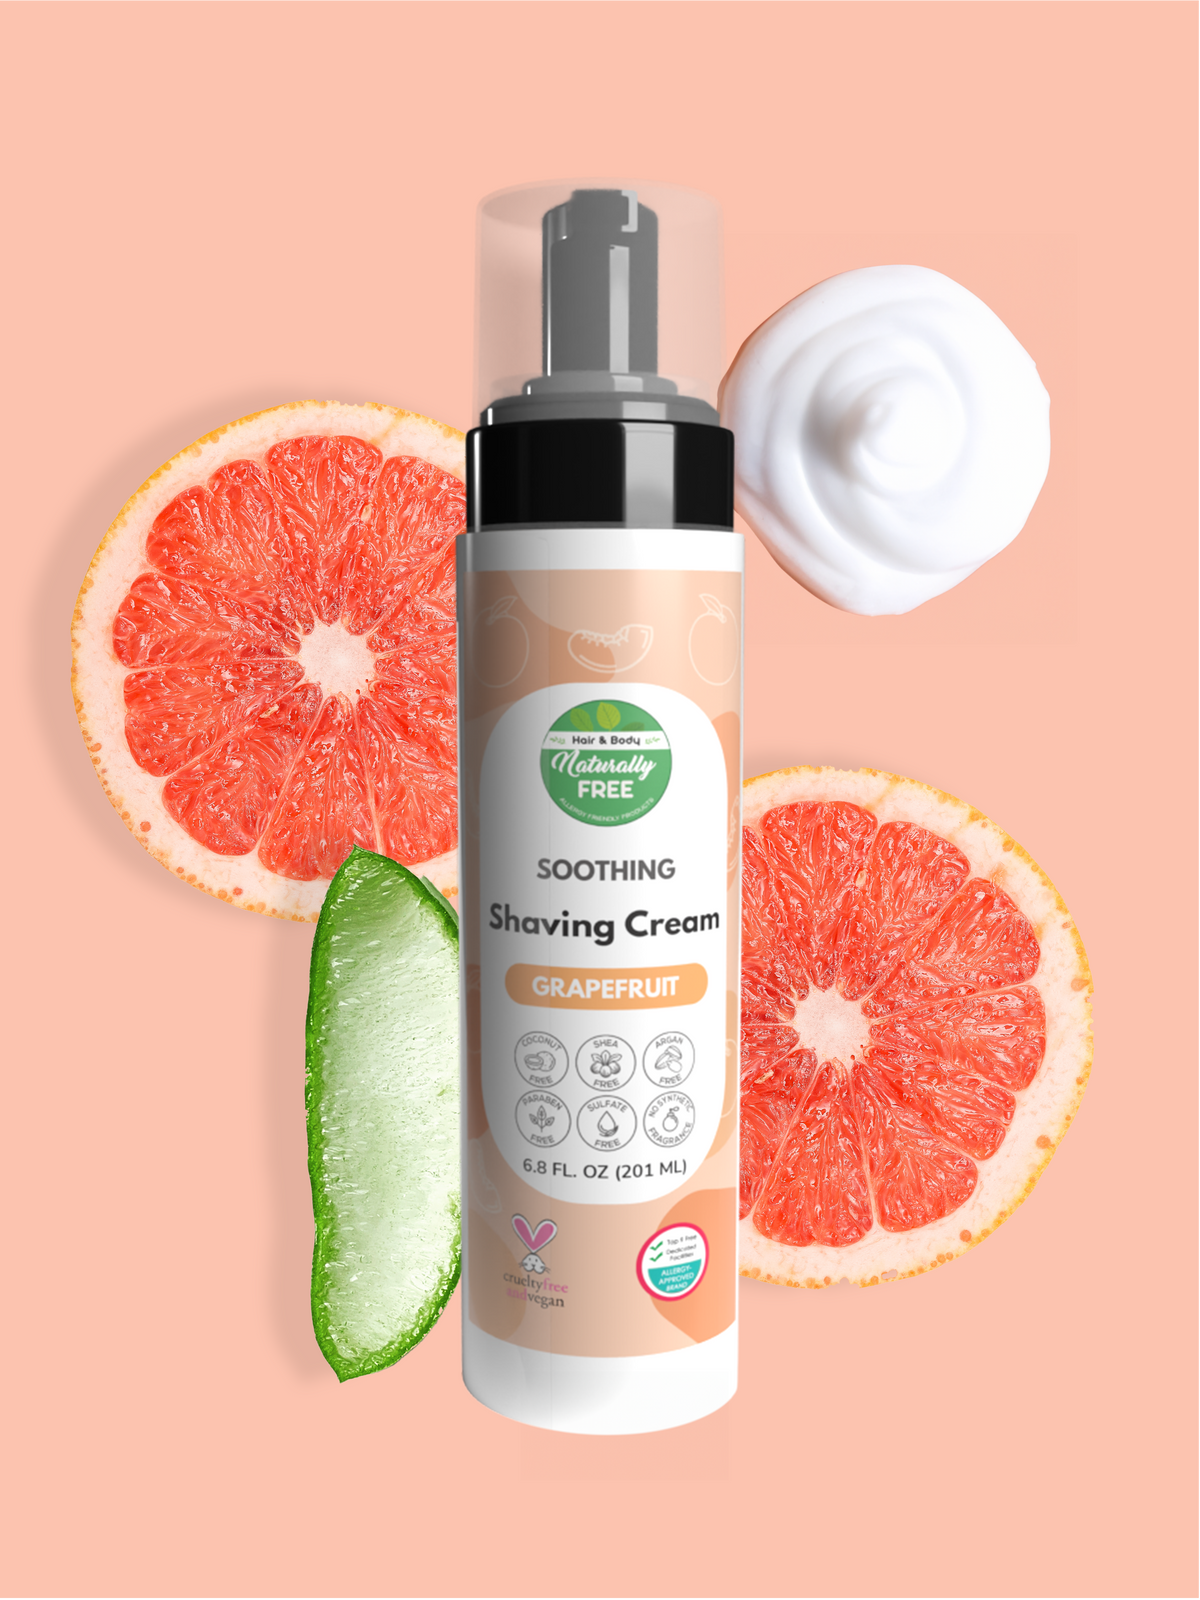 Grapefruit Soothing Shaving Cream | Hypoallergenic - Allergy Friendly - Naturally Free